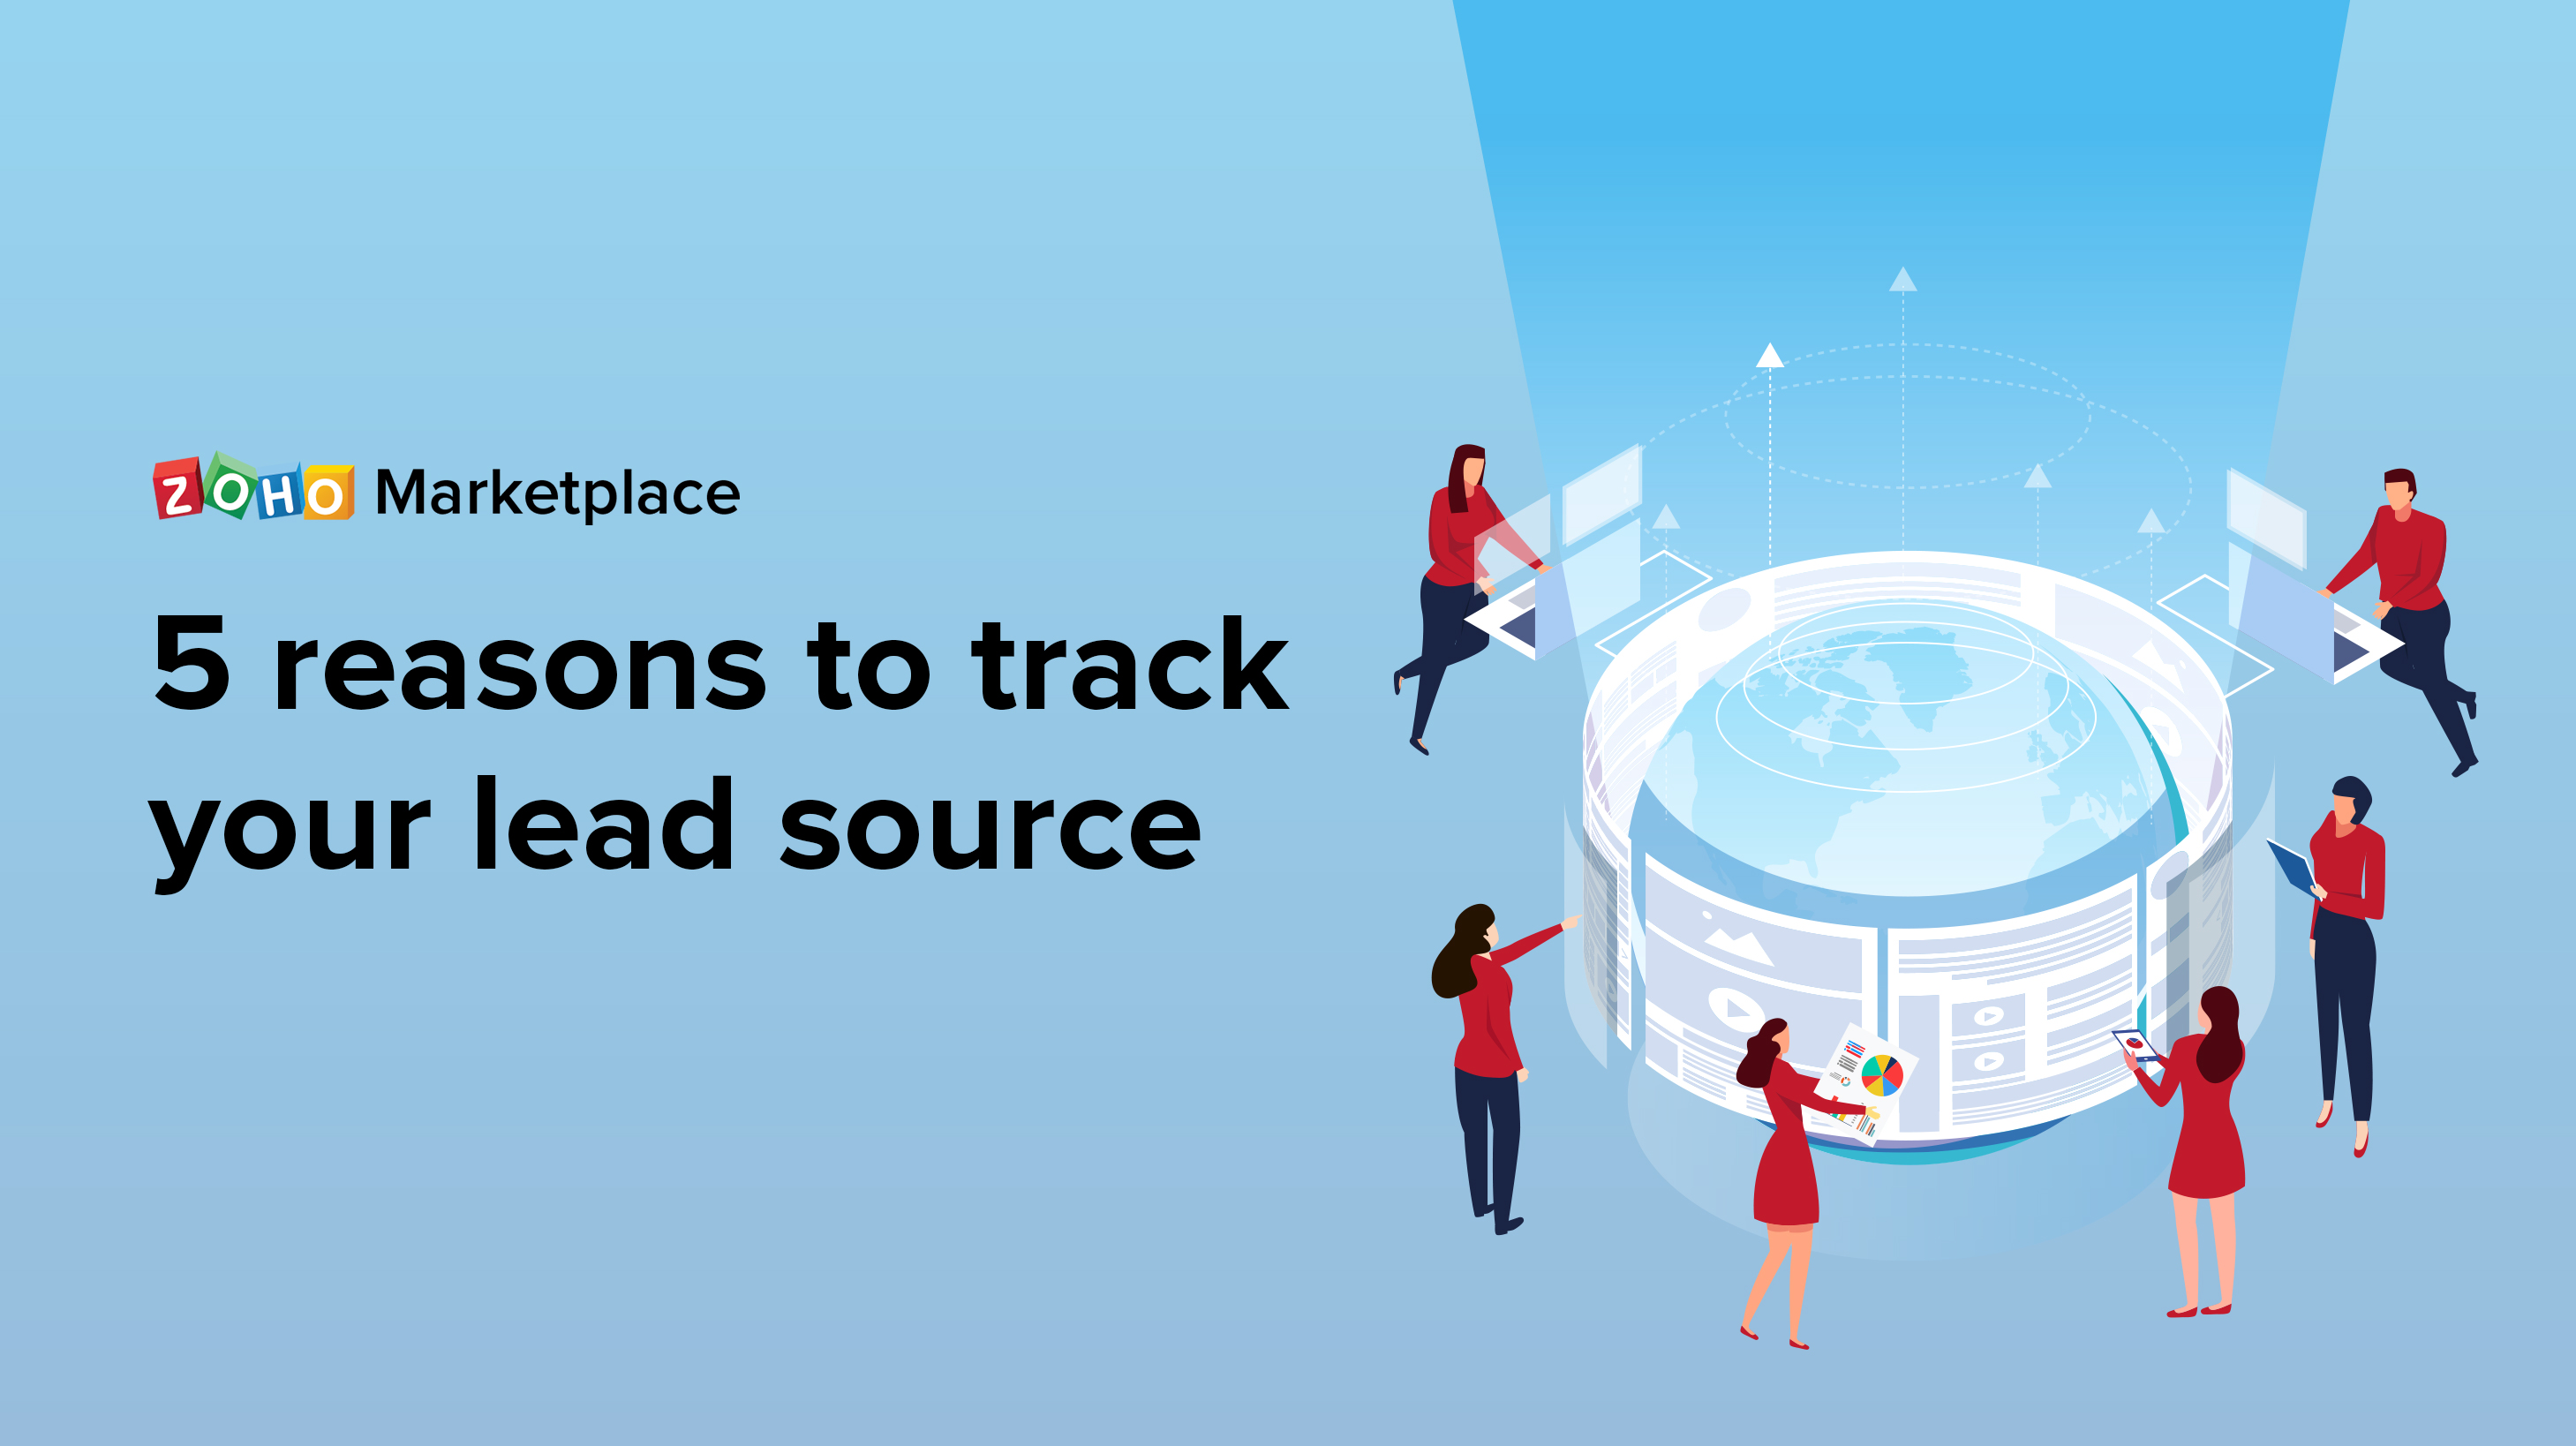 Five reasons to track your lead source